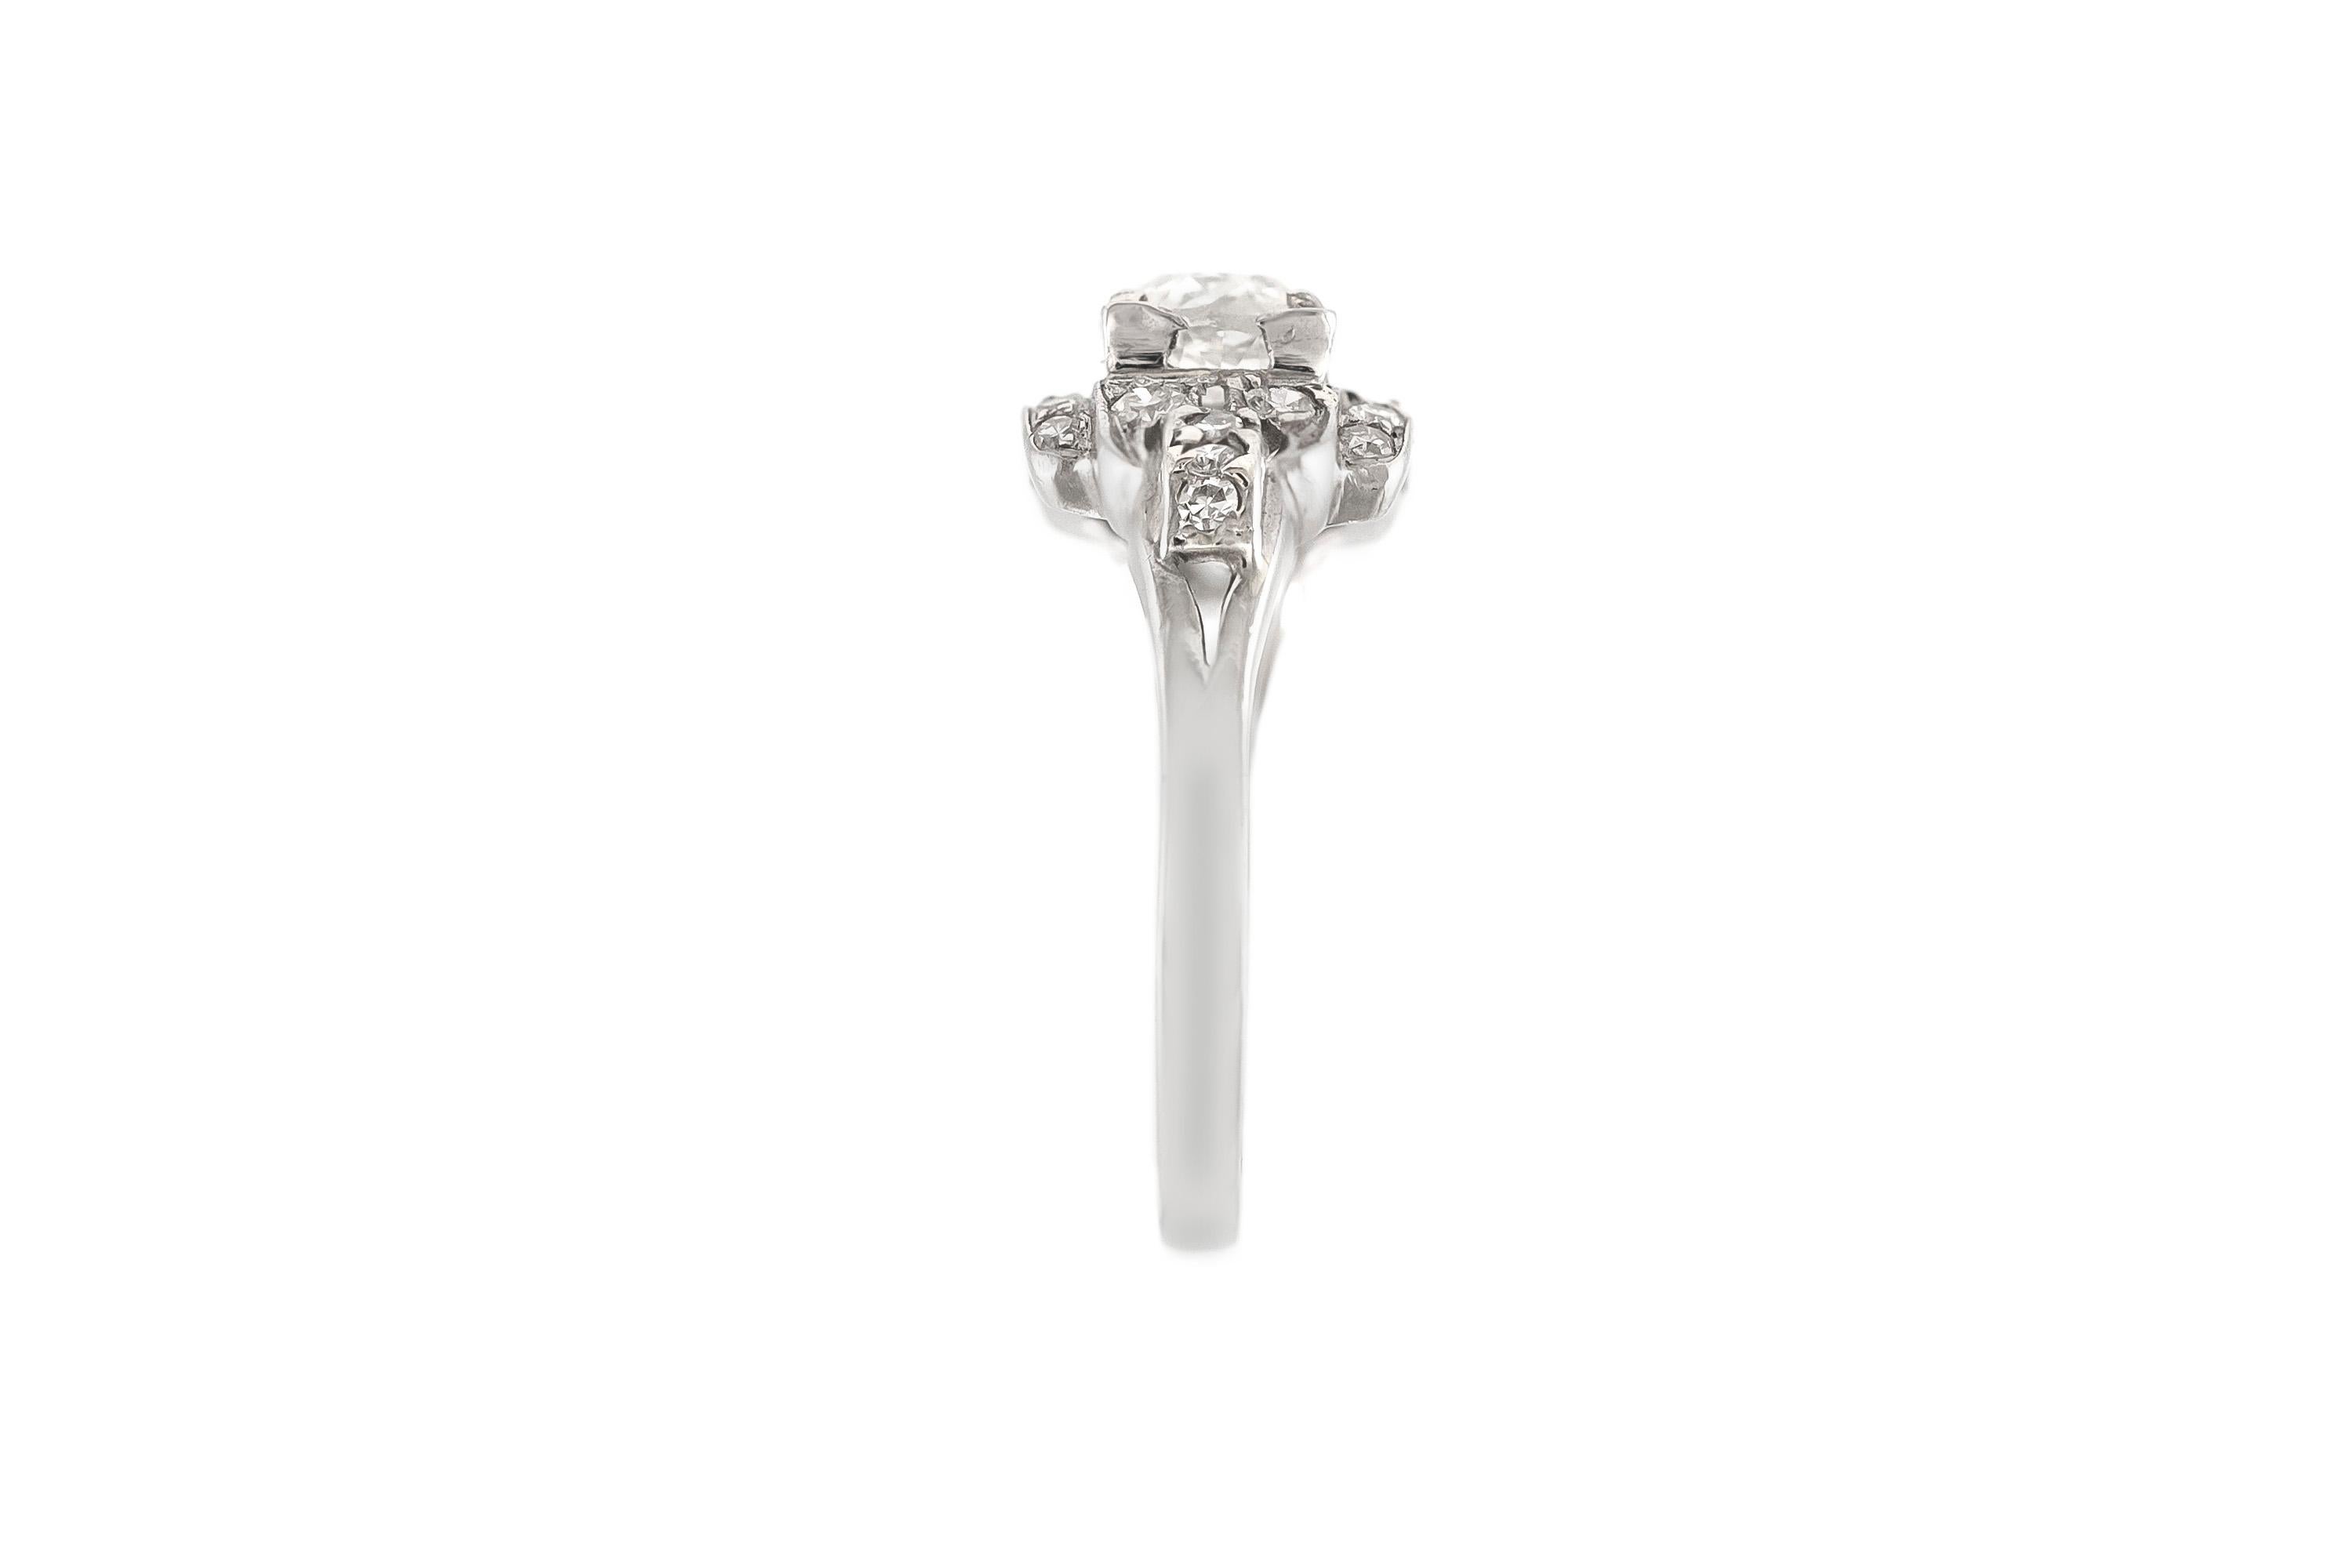 The beautiful ring is finely crafted in platinum with center diamond weighing approximately total of 0.60 carat and around diamonds weighing approximately total of 0.35 carat .
Circa 1930
Easy to resize